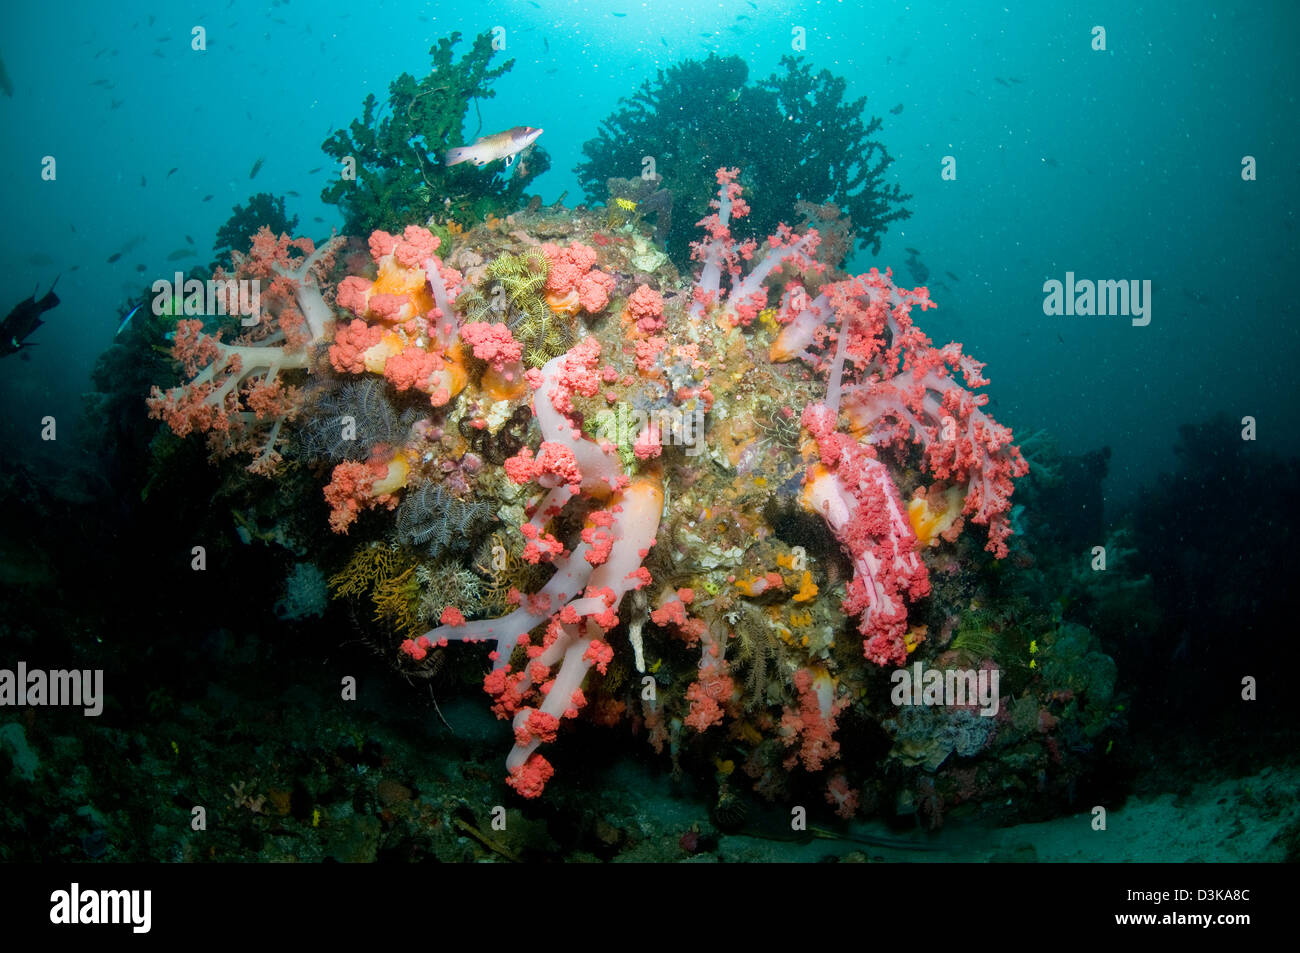 Colorful reef scene with massive pink and white soft coral, yellow crinoid, green coral, Komodo, Indonesia. Stock Photo